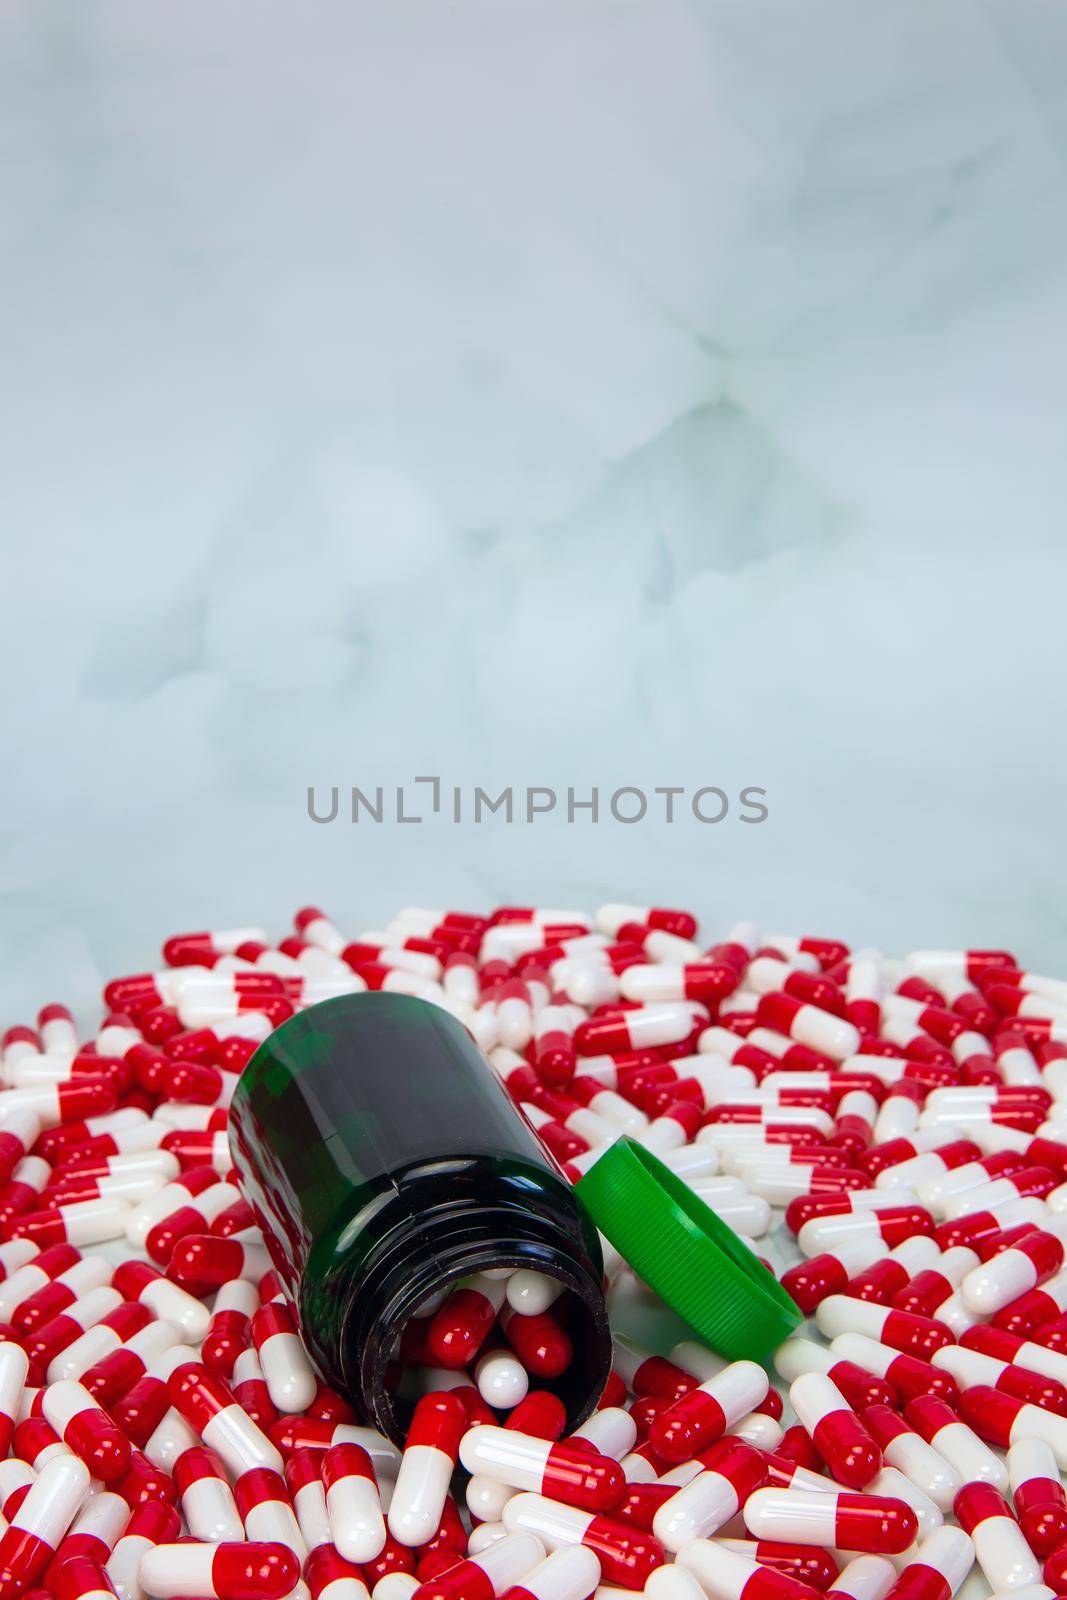 Bottle with red and white capsule on white background, Vitamin,drugs or pharmaceutical medication background, Health, medical and business concept copy space